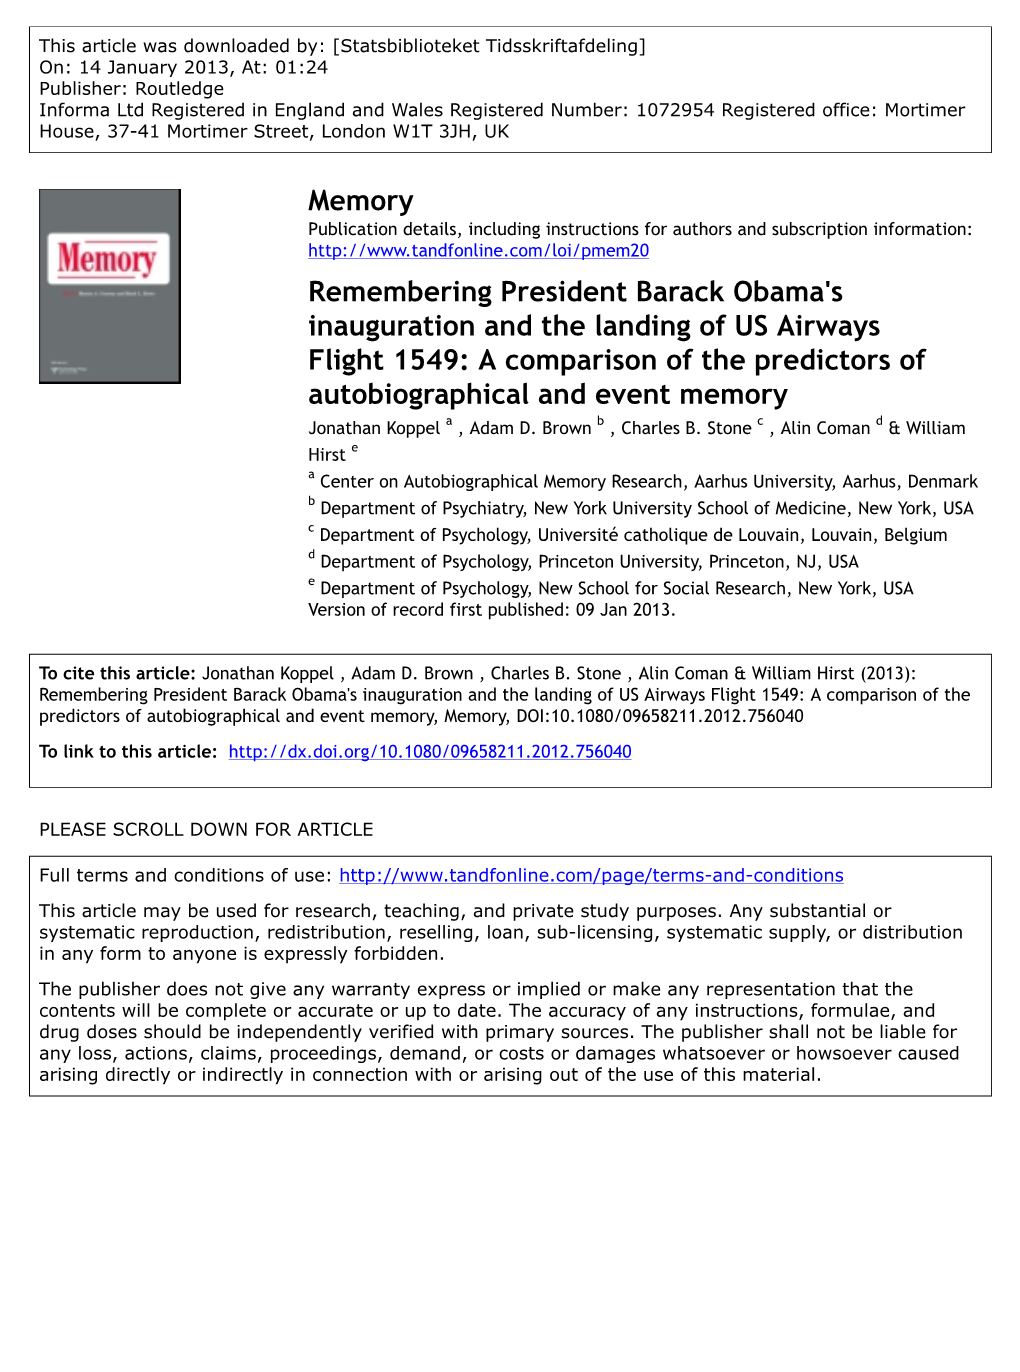 Remembering President Barack Obama's Inauguration and the Landing of US Airways Flight 1549: a Comparison of the Predictors